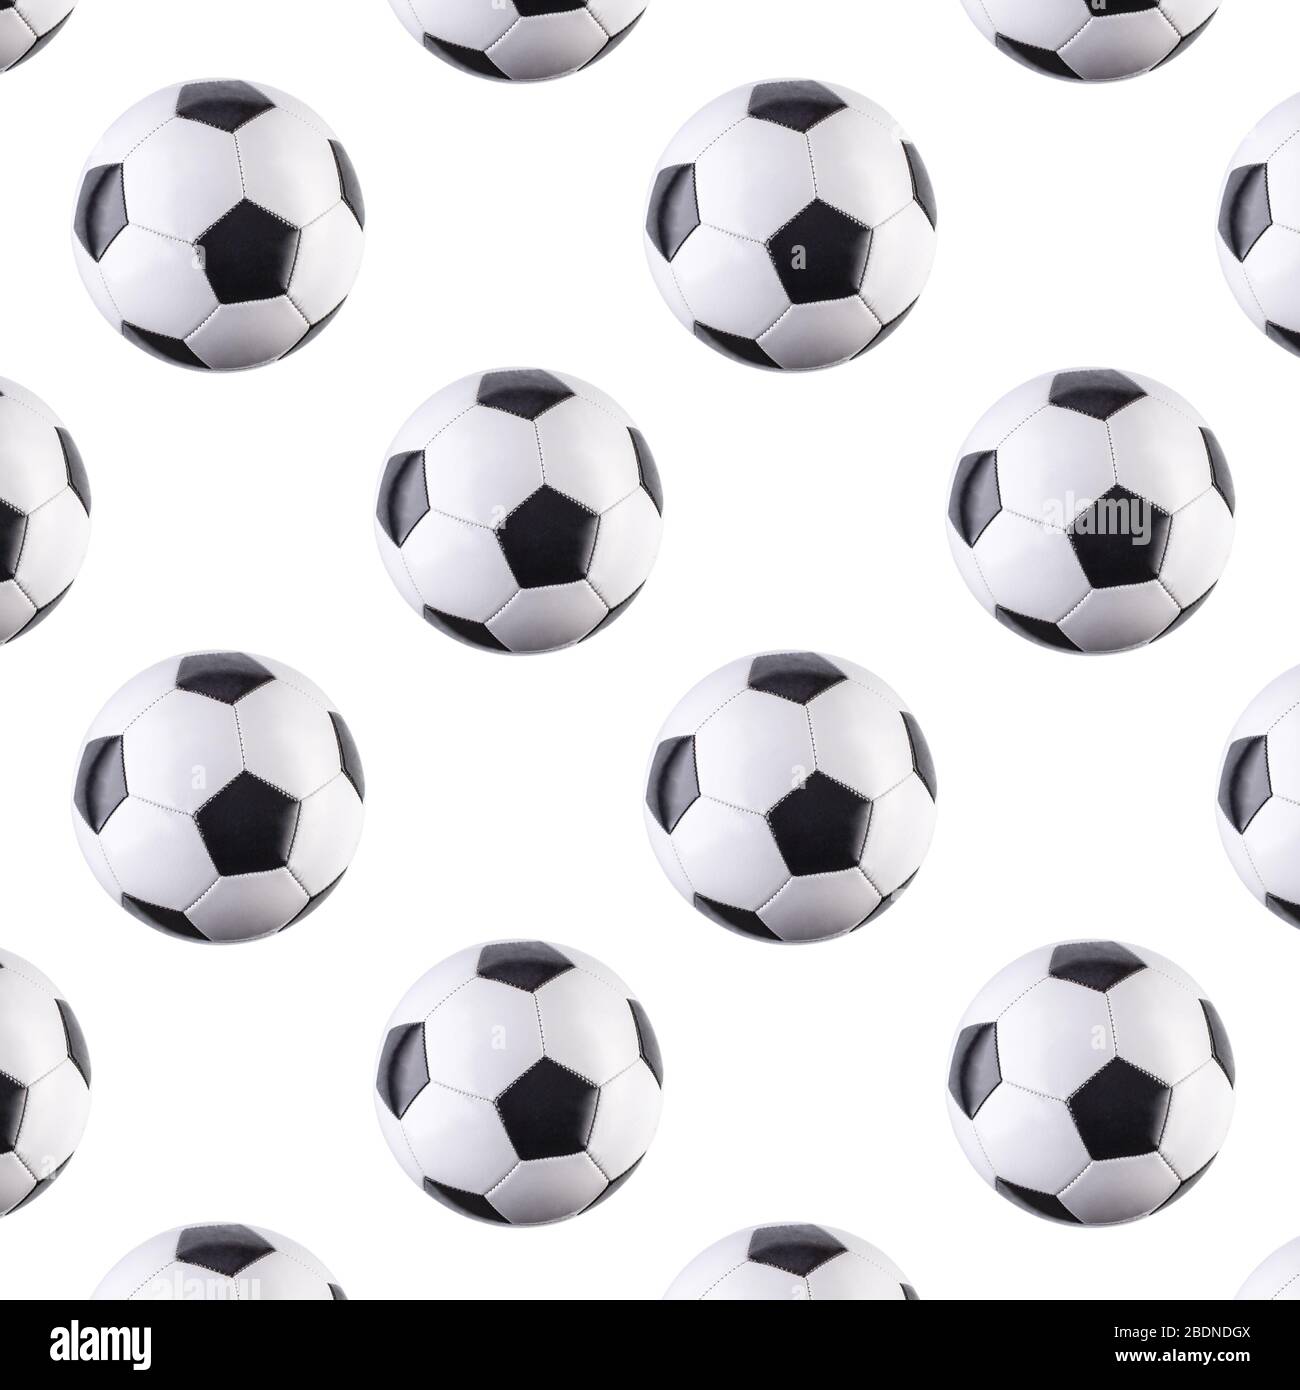 Football Mobile Wallpaper Images Free Download on Lovepik  400303178